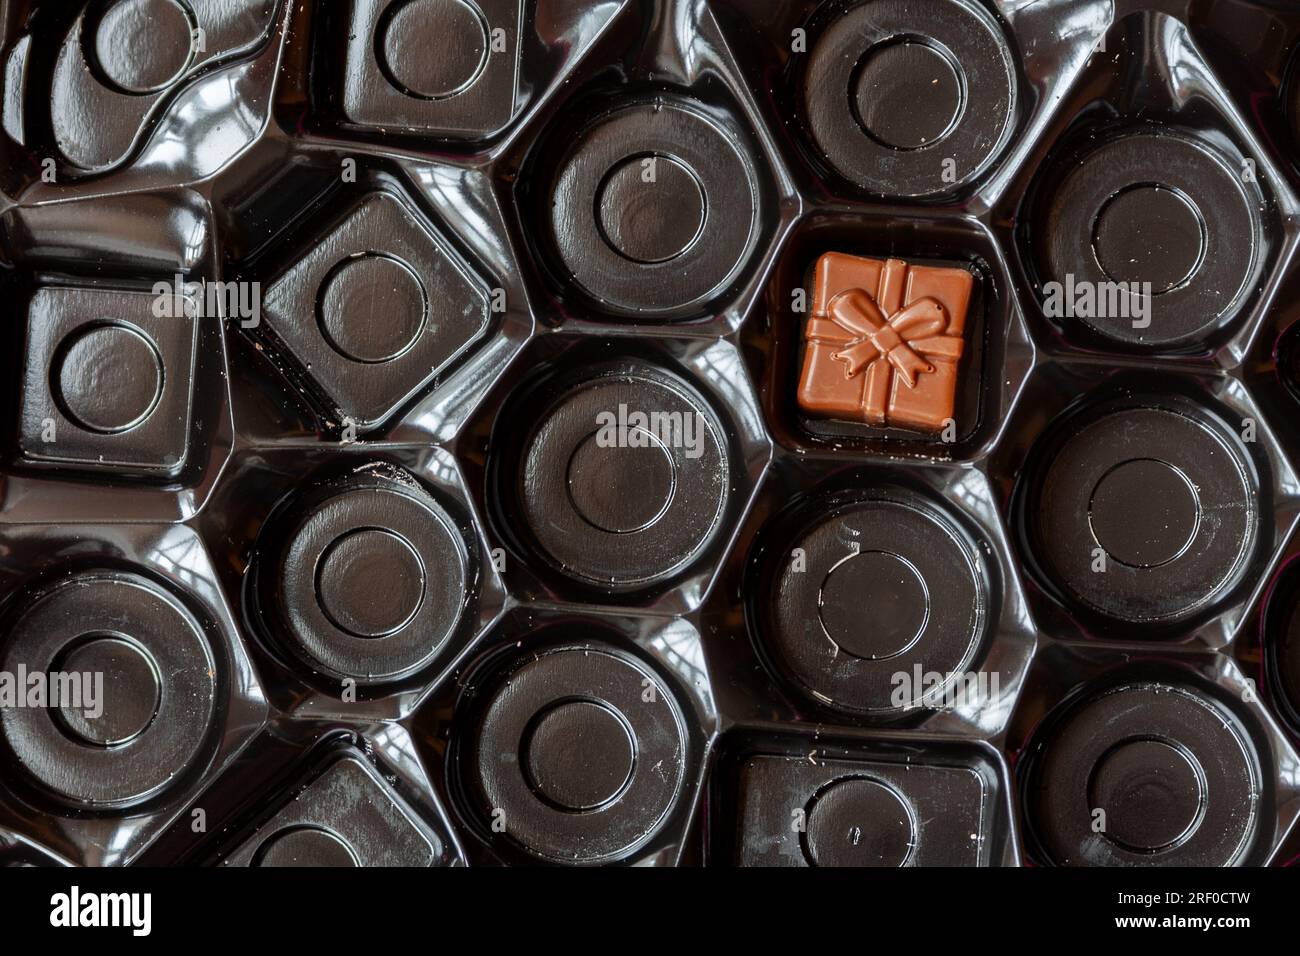 The last chocolate in a box. Stock Photo